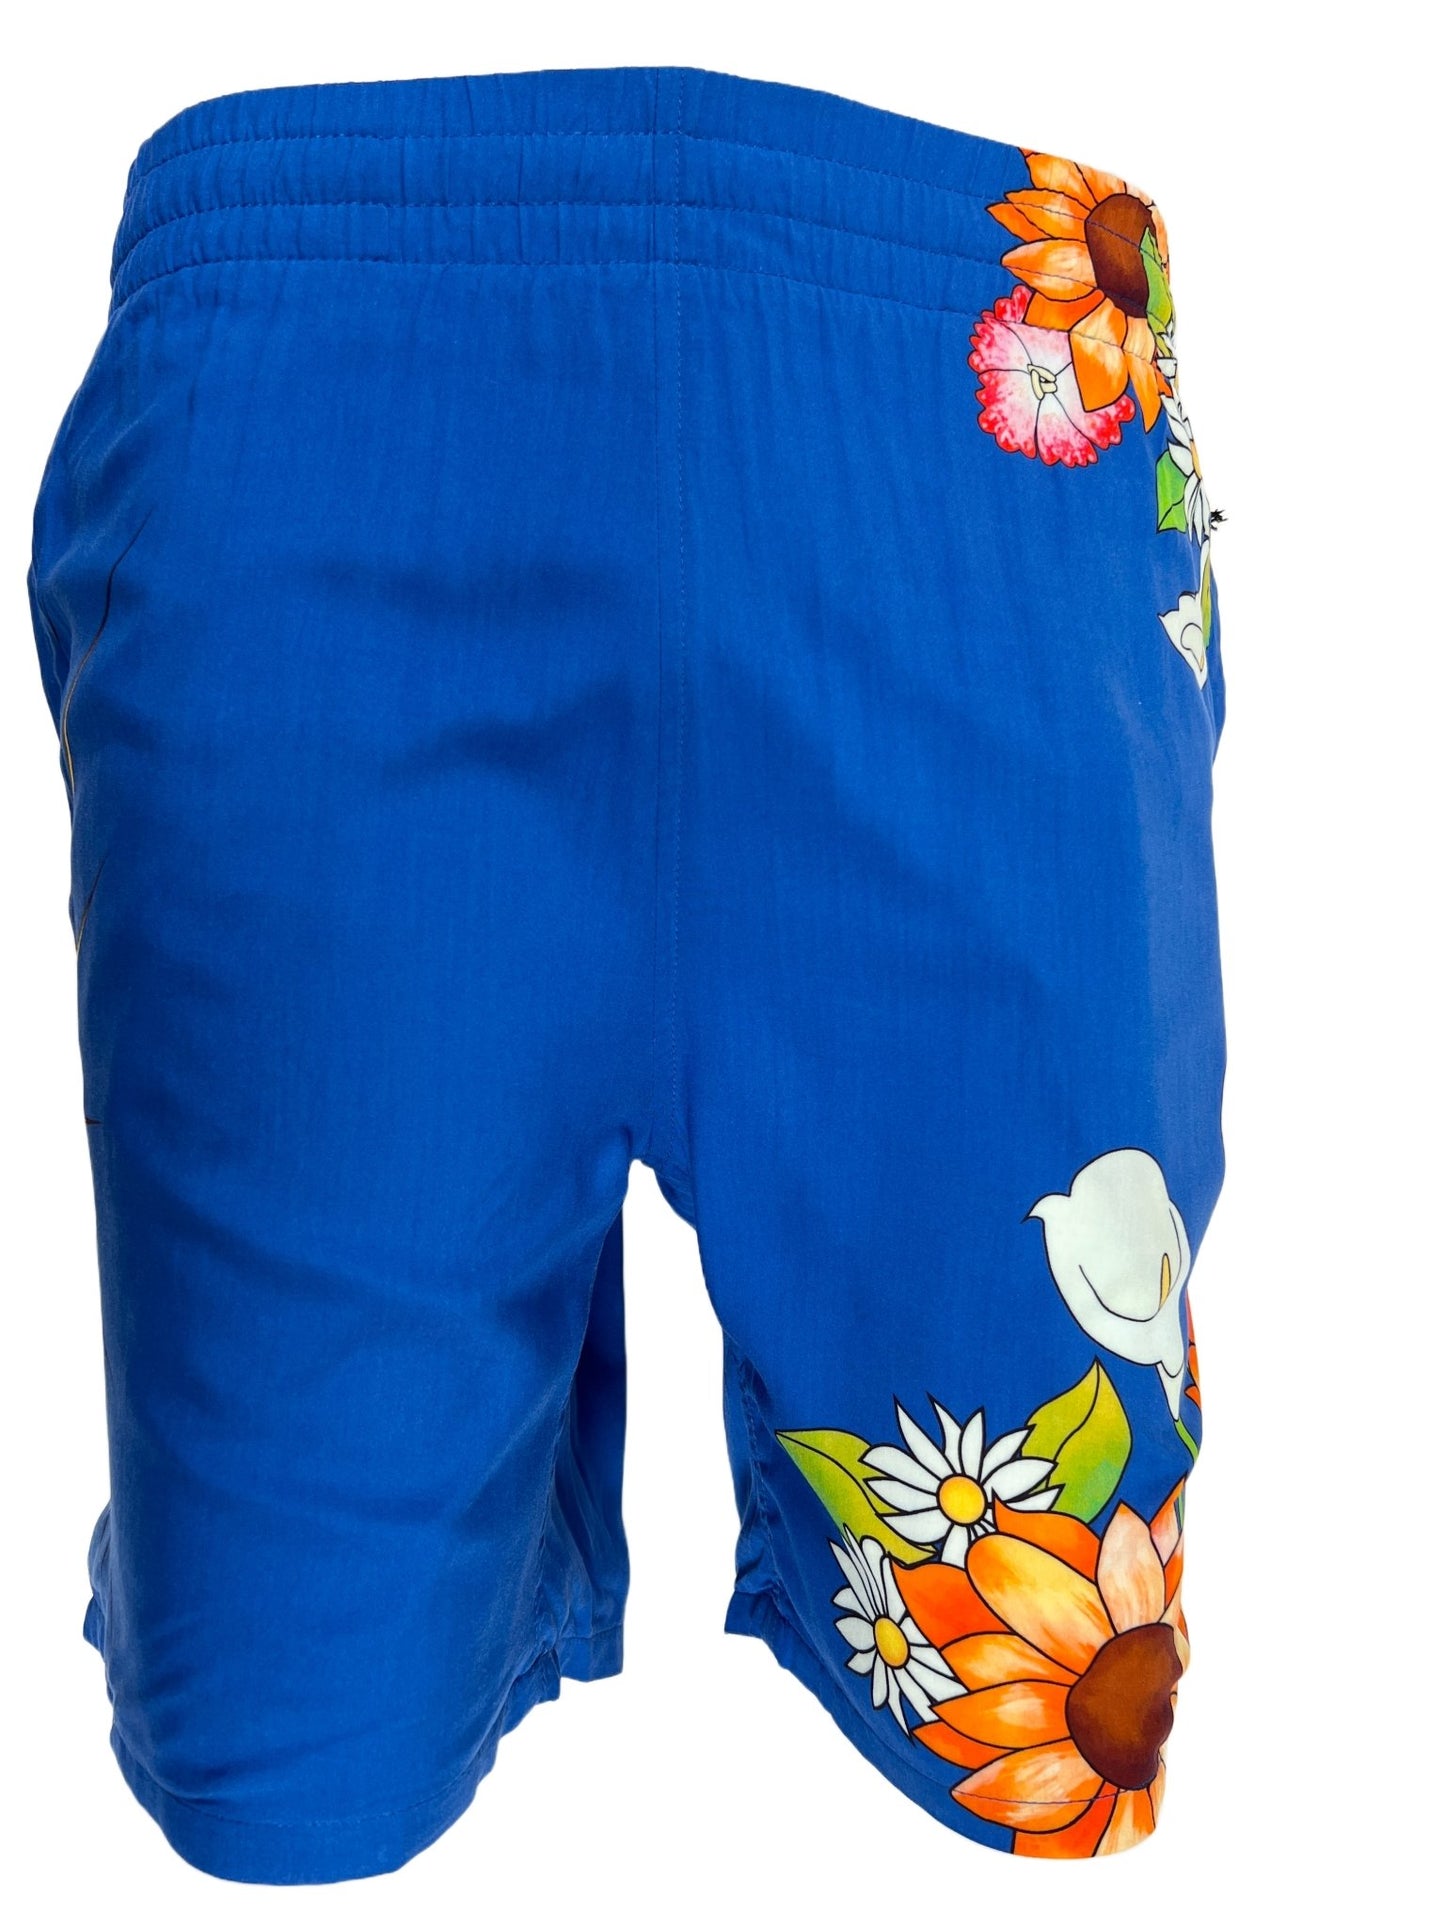 A PLEASURES blue swim shorts with floral print and sunflowers on it.